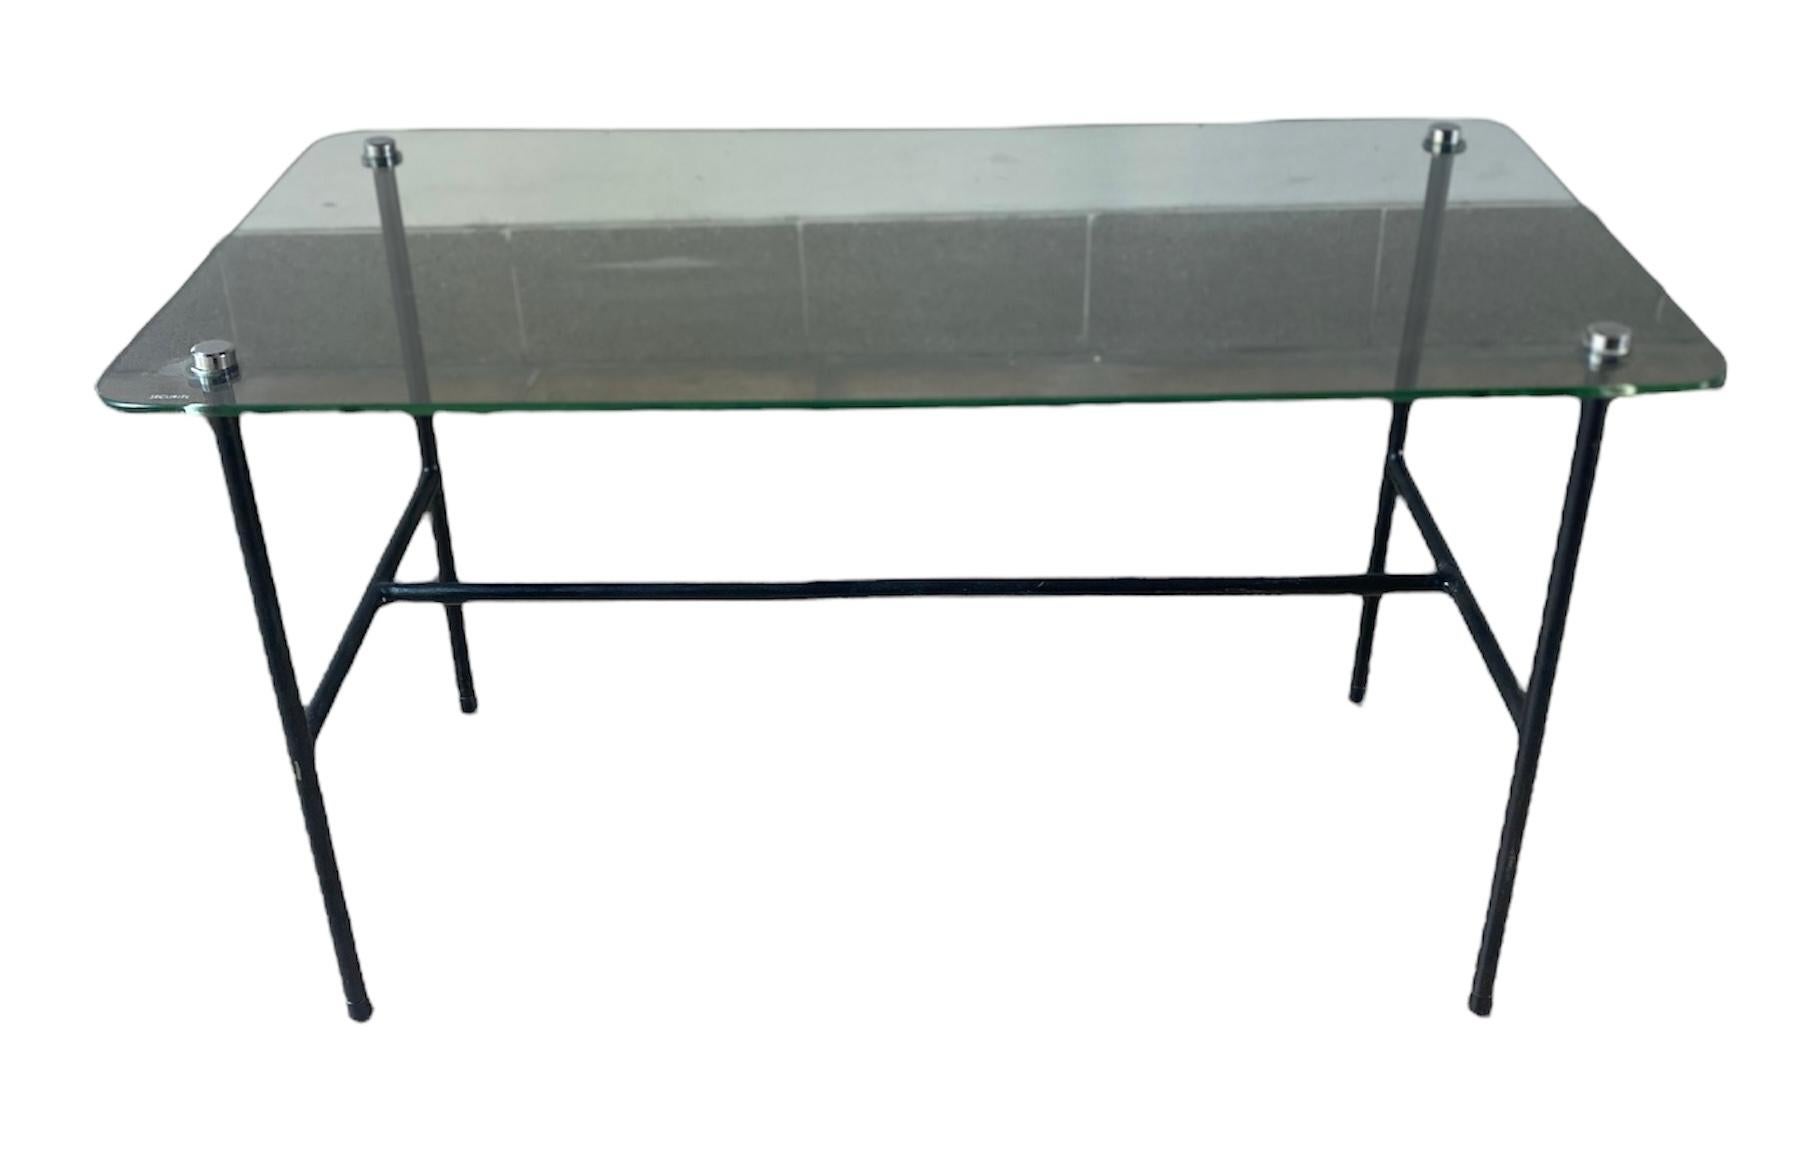 French Coffee Table Disderot Glass and Steel, Pierre Guariche, 1950 For Sale 4